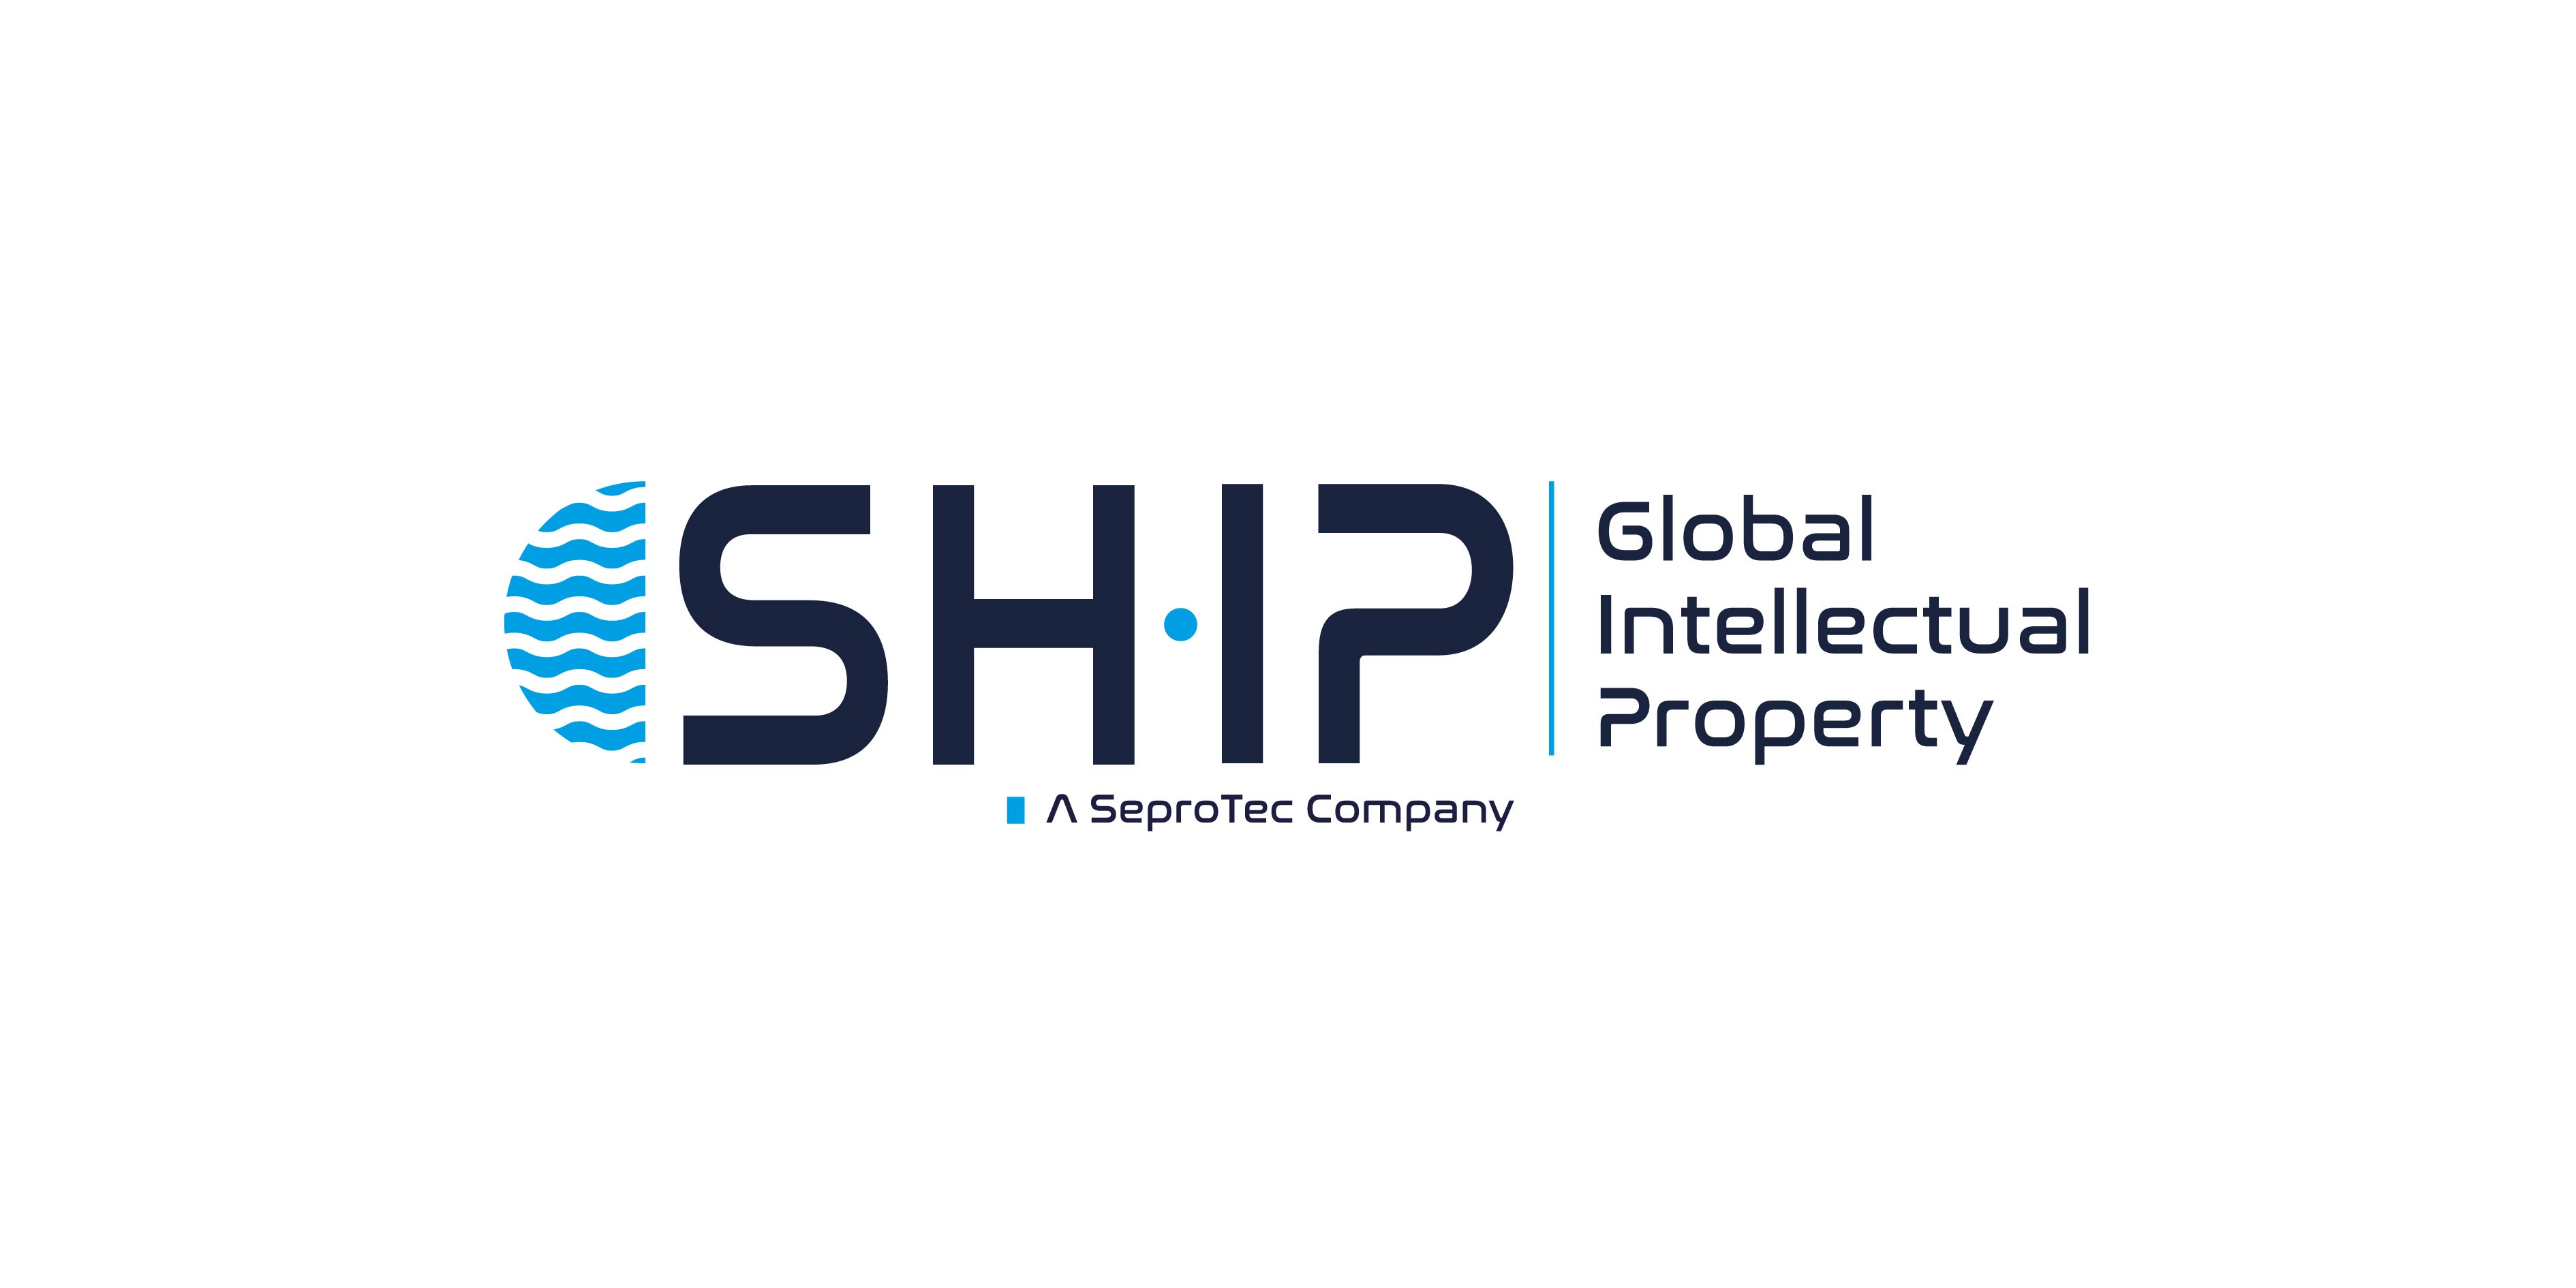 SHIP Global IP is renewing its brand image to better reflect its technological DNA